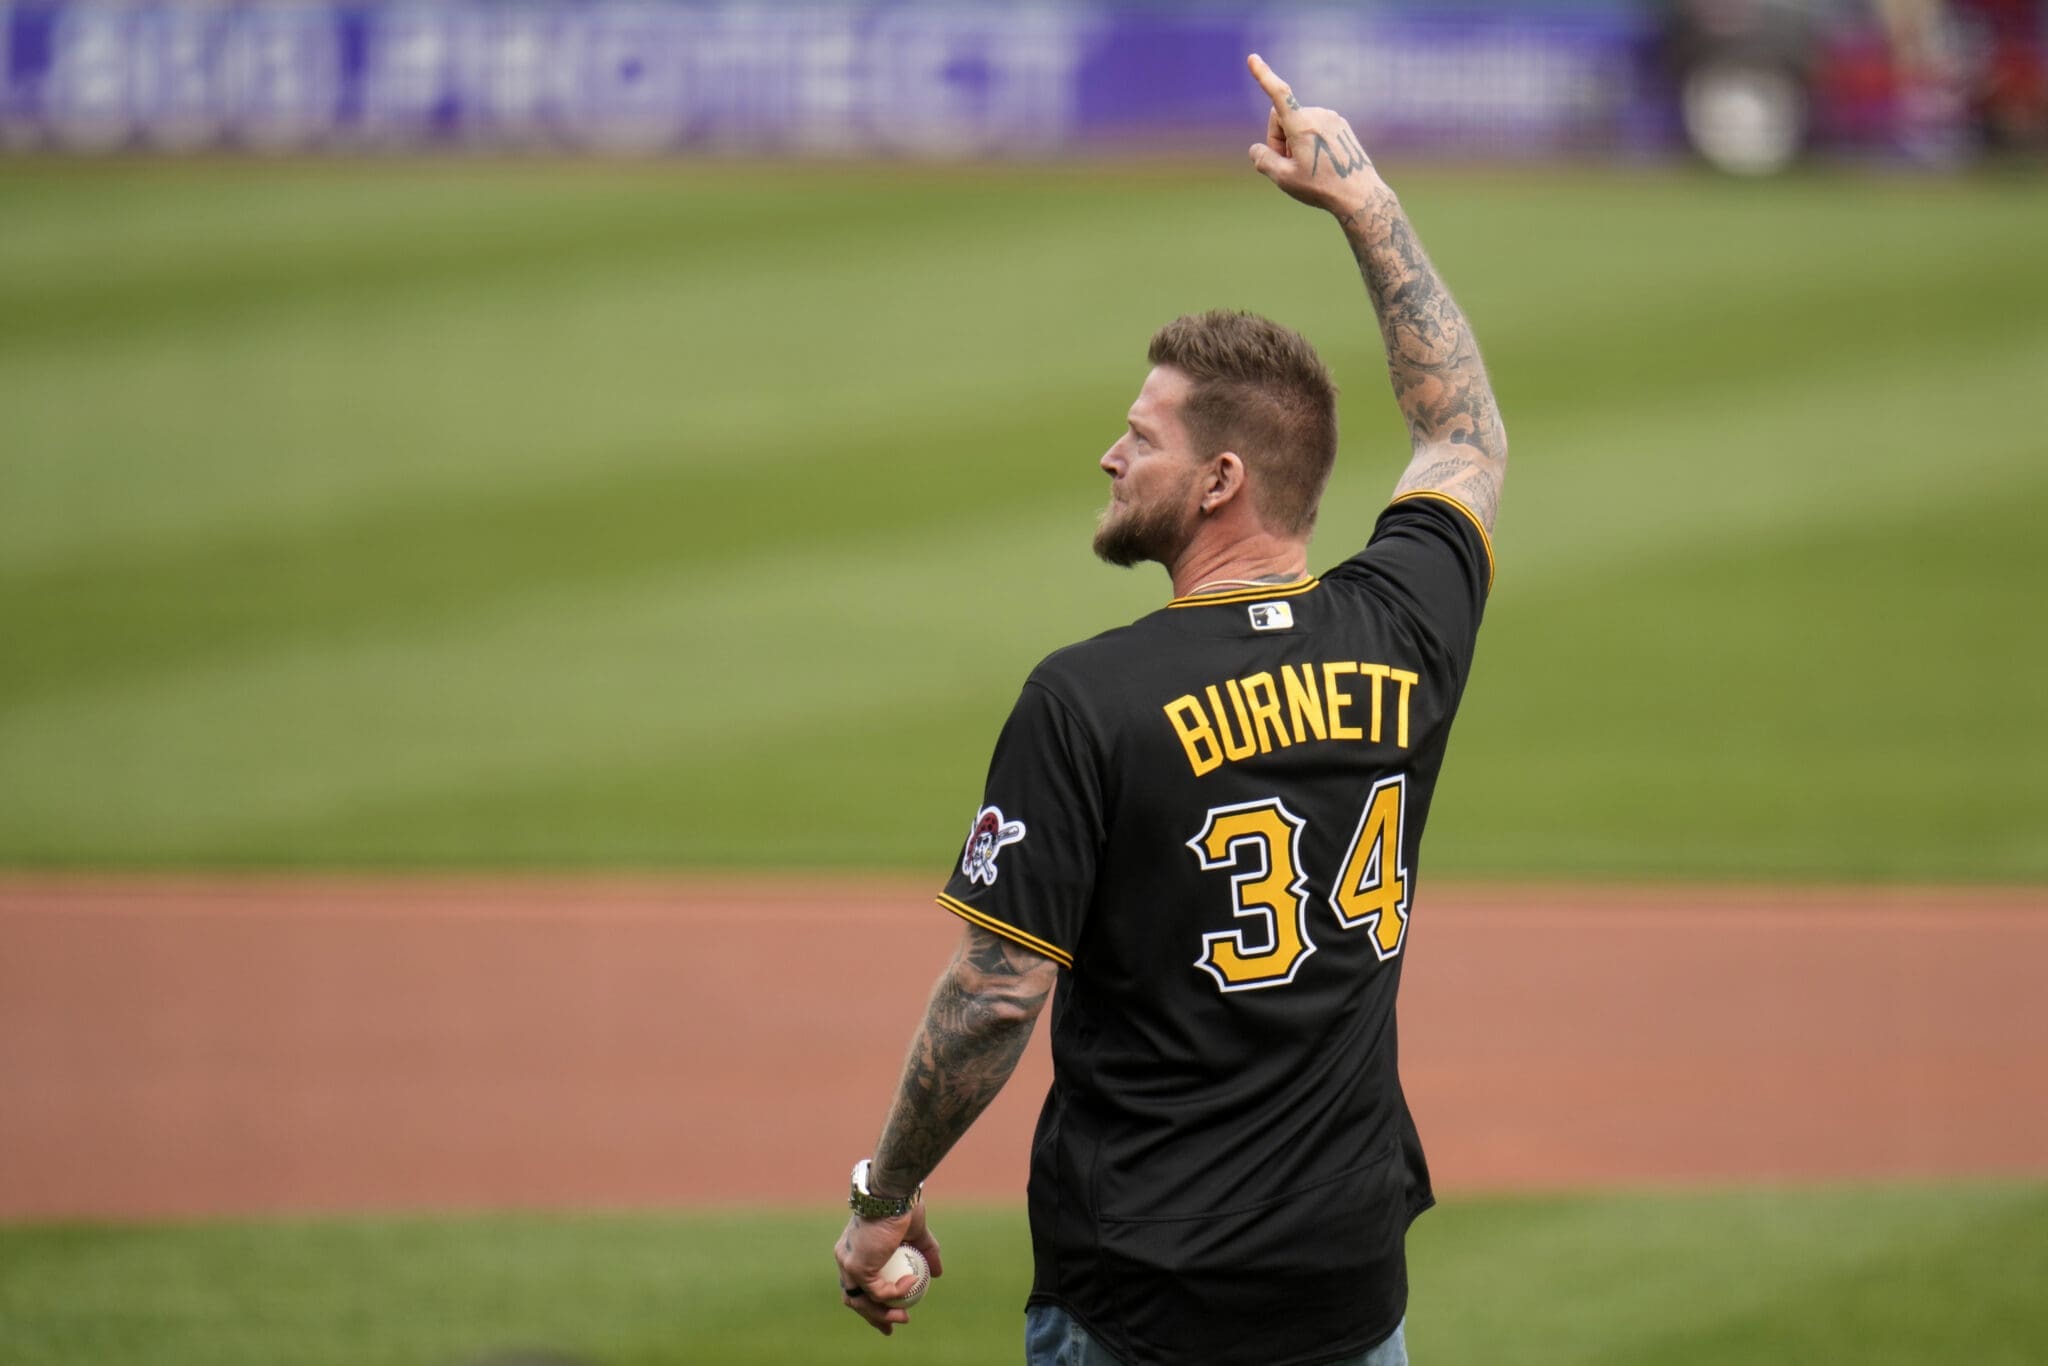 Former Pittsburgh Pirates pitcher A.J. Burnett waves to fans at PNC Park before throwing a ceremonial first pitch before the Pirates home opener baseball game against the Chicago White Sox in Pittsburgh, Friday, April 7, 2023. (AP Photo/Gene J. Puskar)